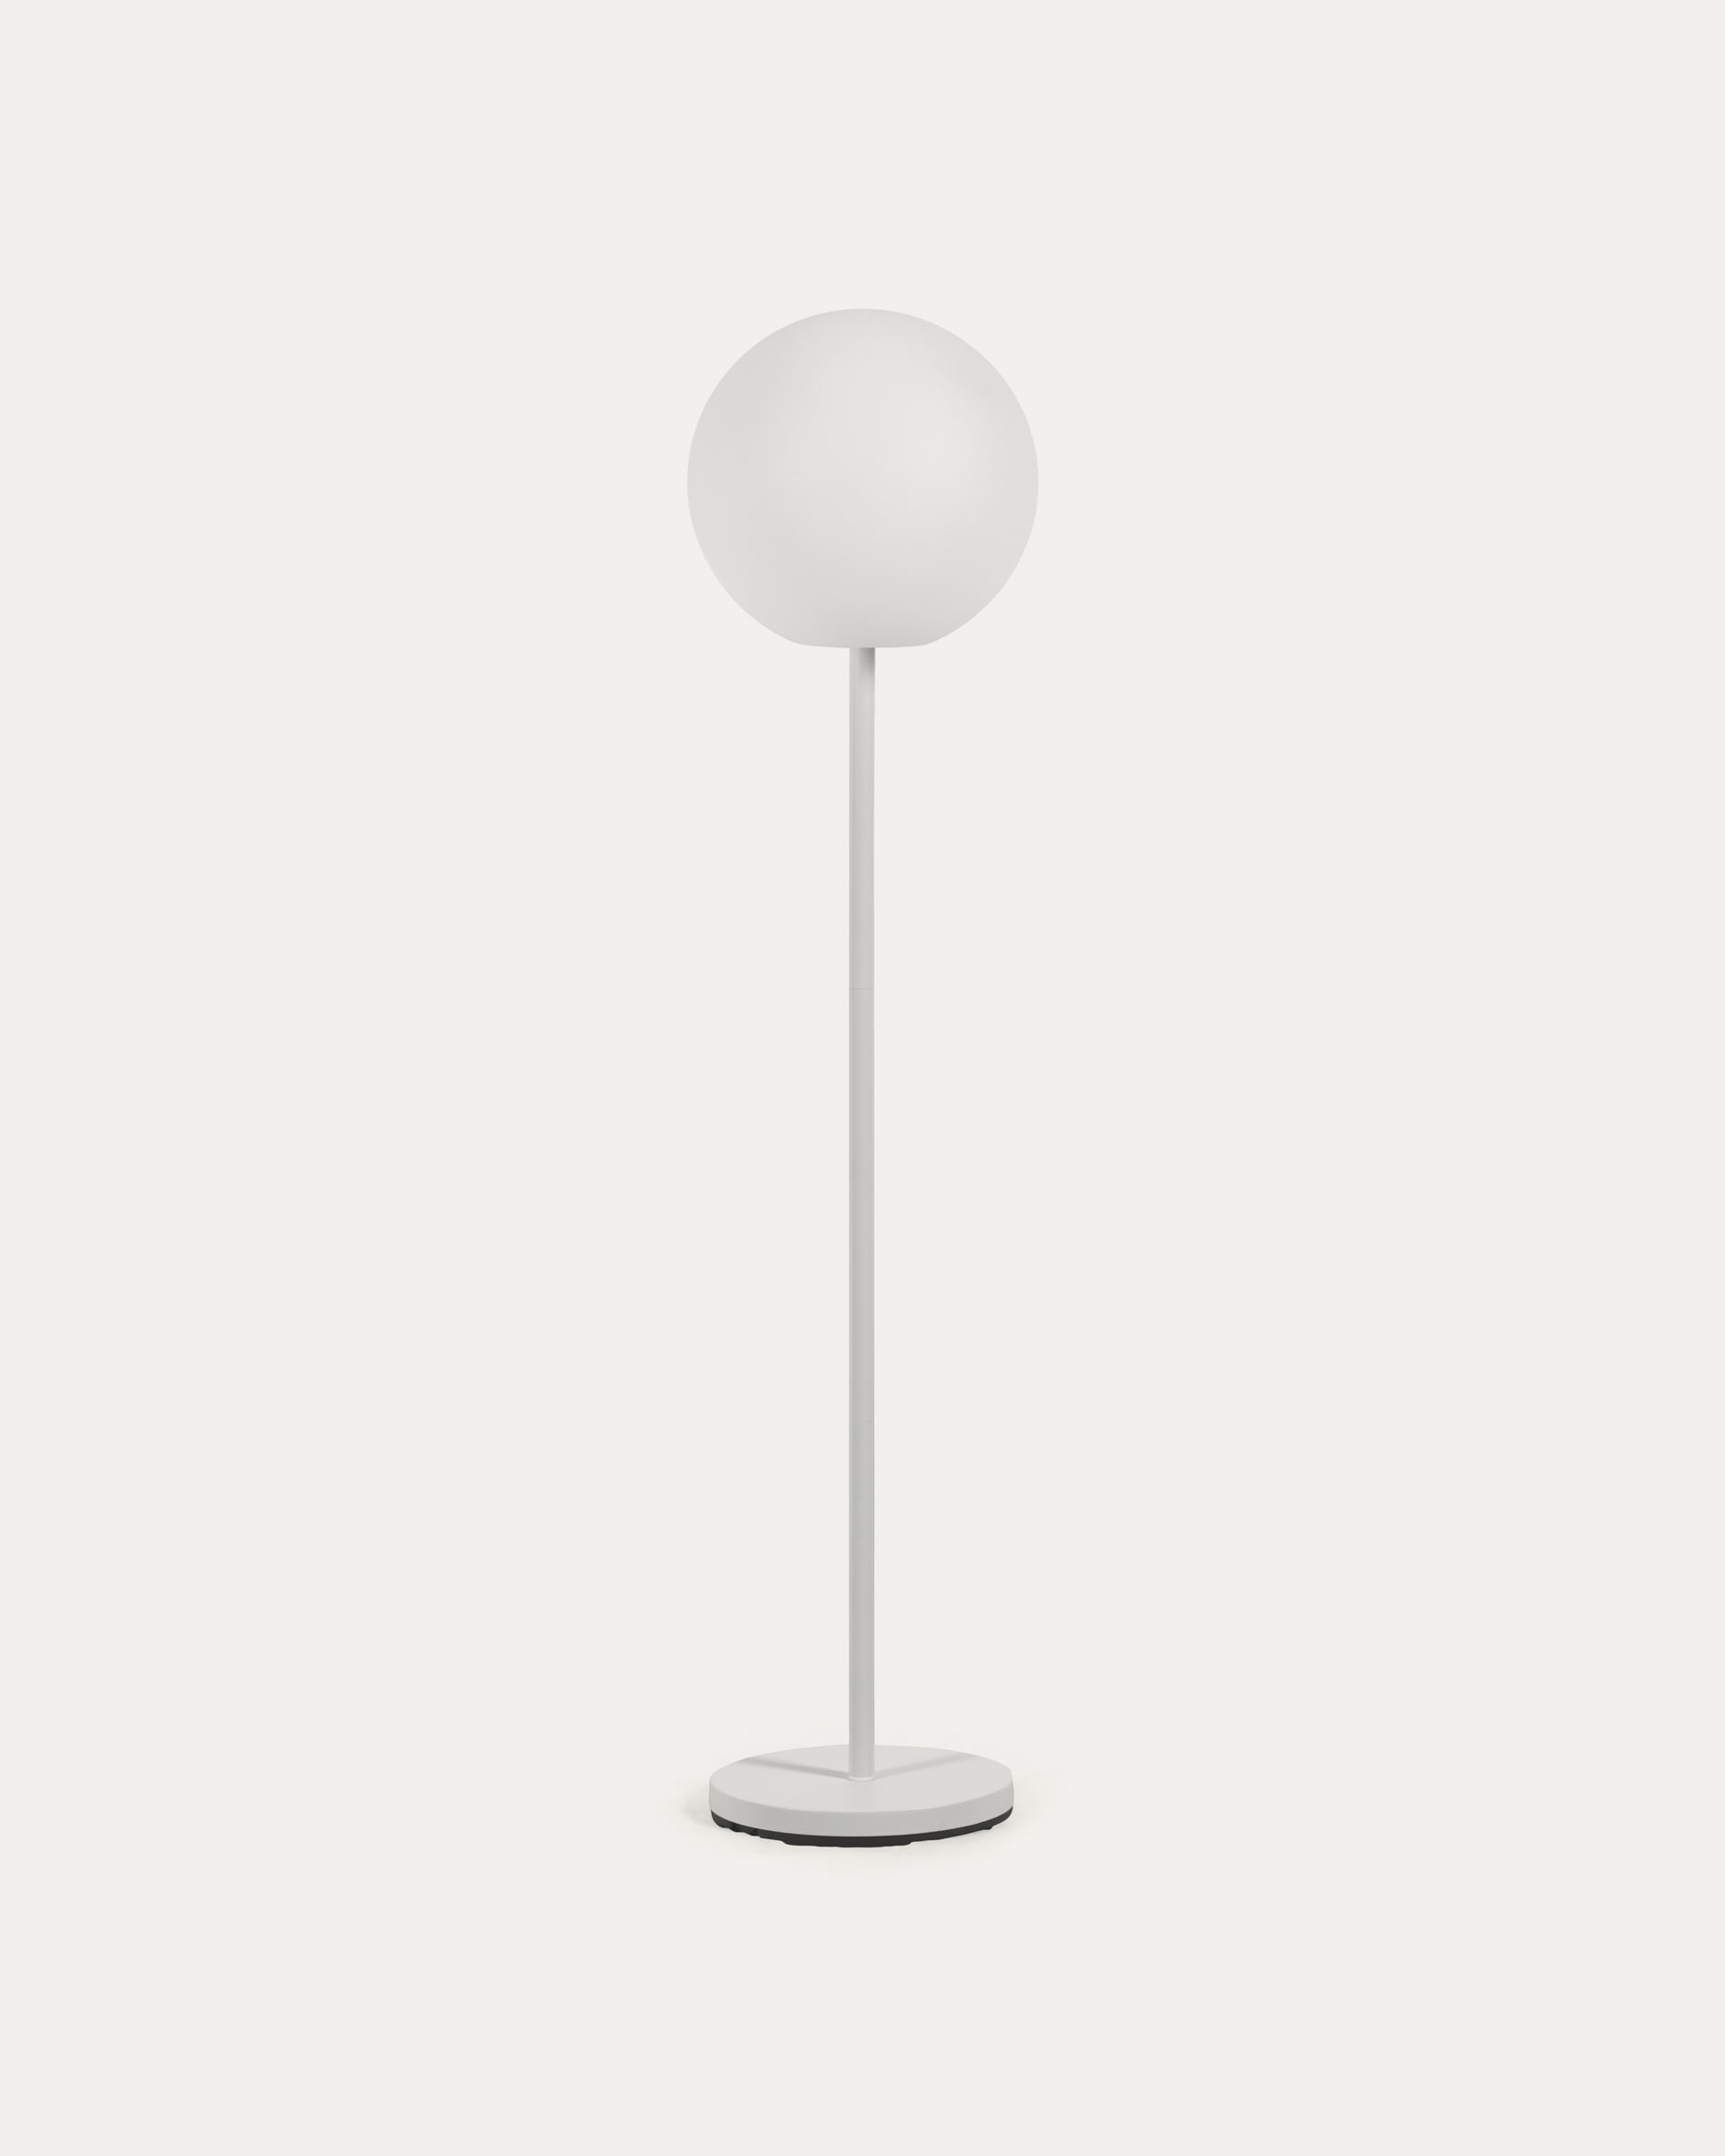 Outdoor Dinesh floor lamp in white steel | Kave Home